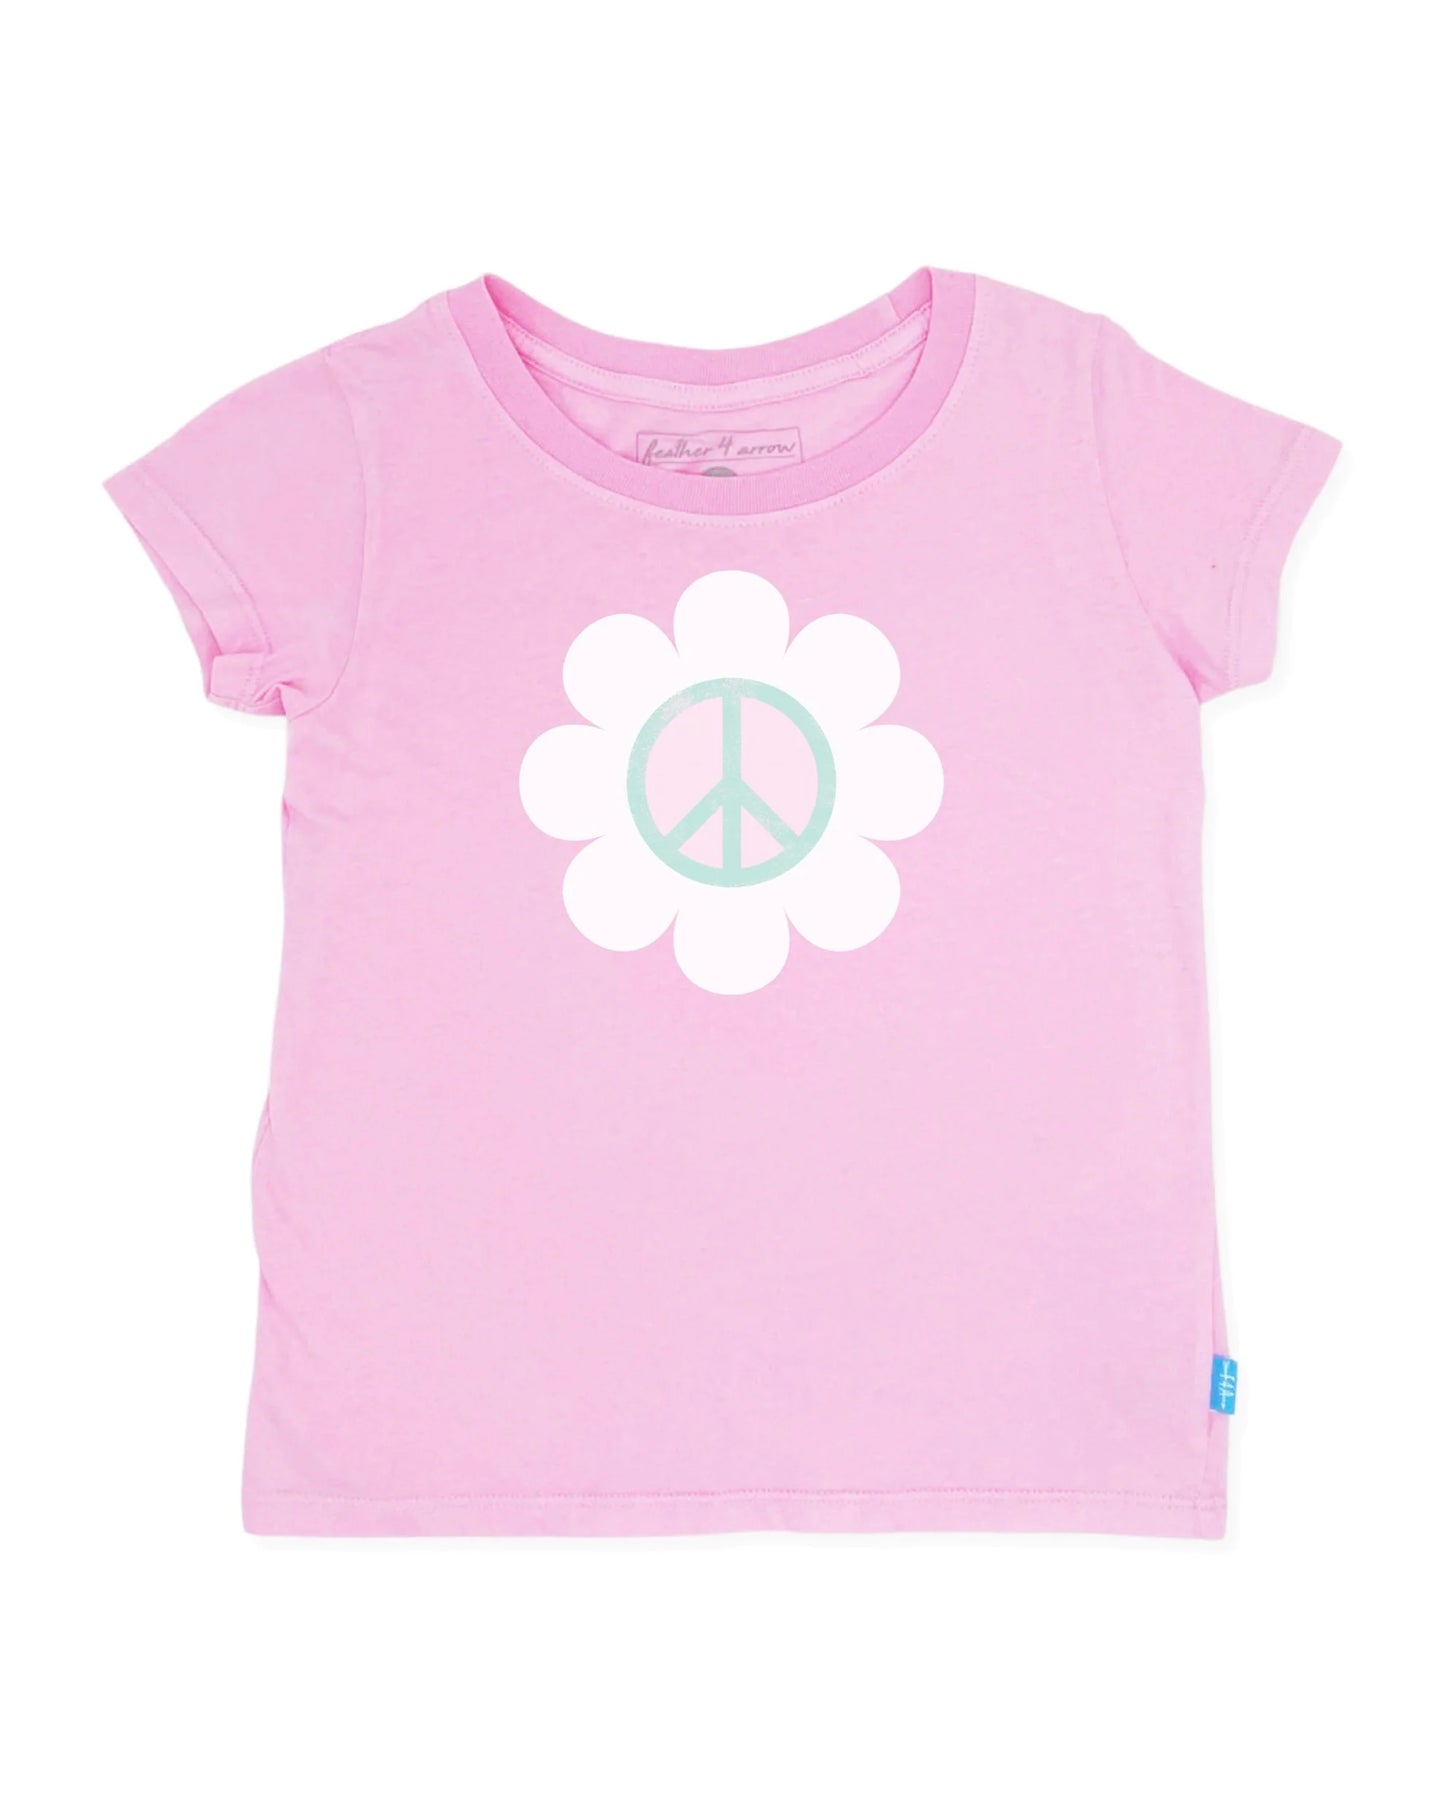 Daisy Everyday Tee  - Doodlebug's Children's Boutique